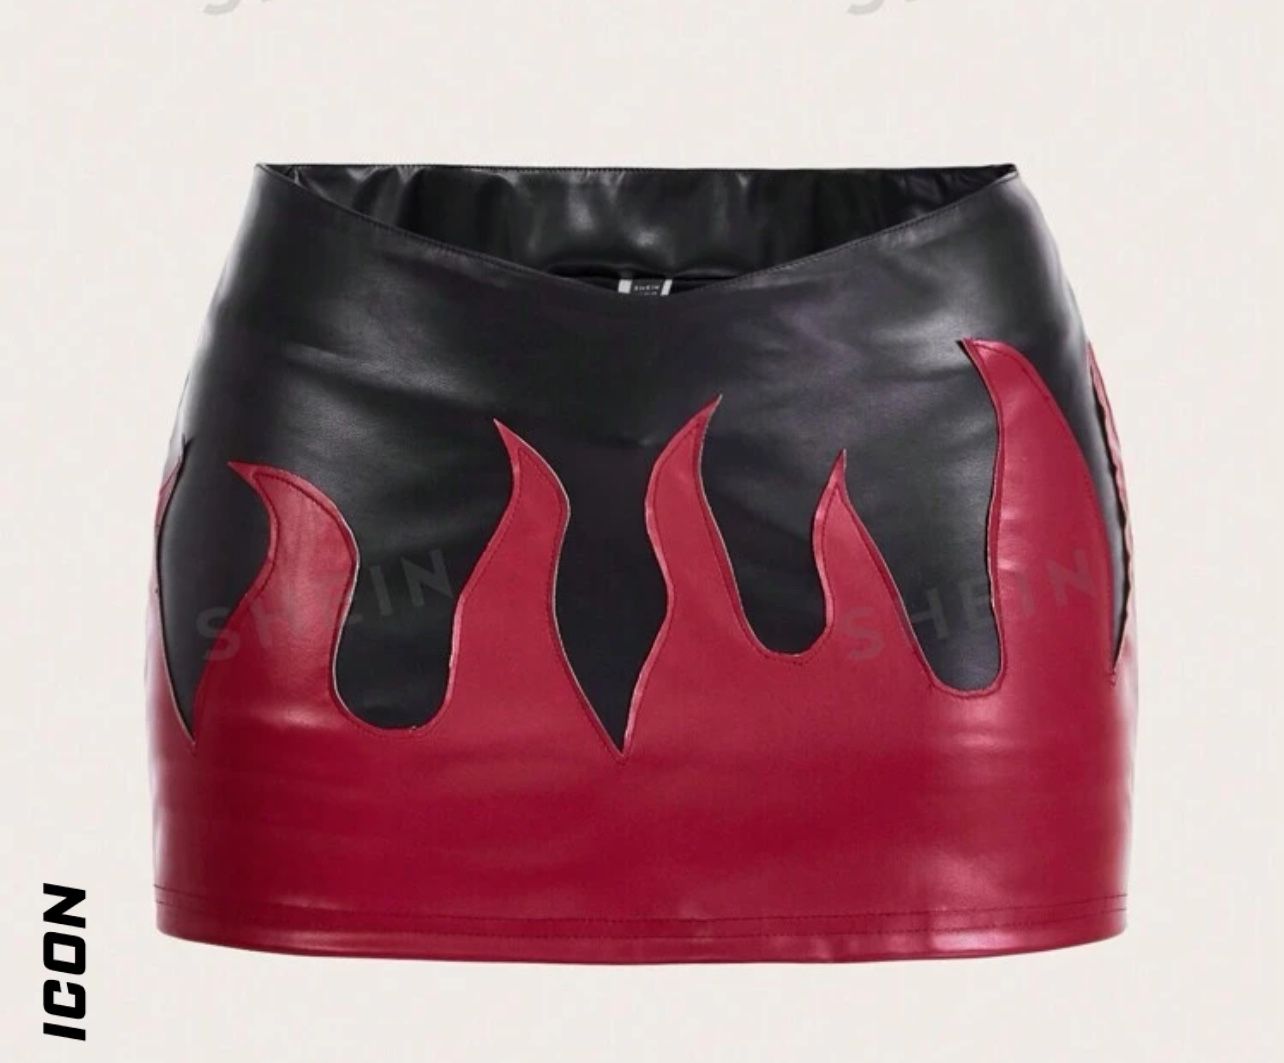 Red leather mini skirt with flame design